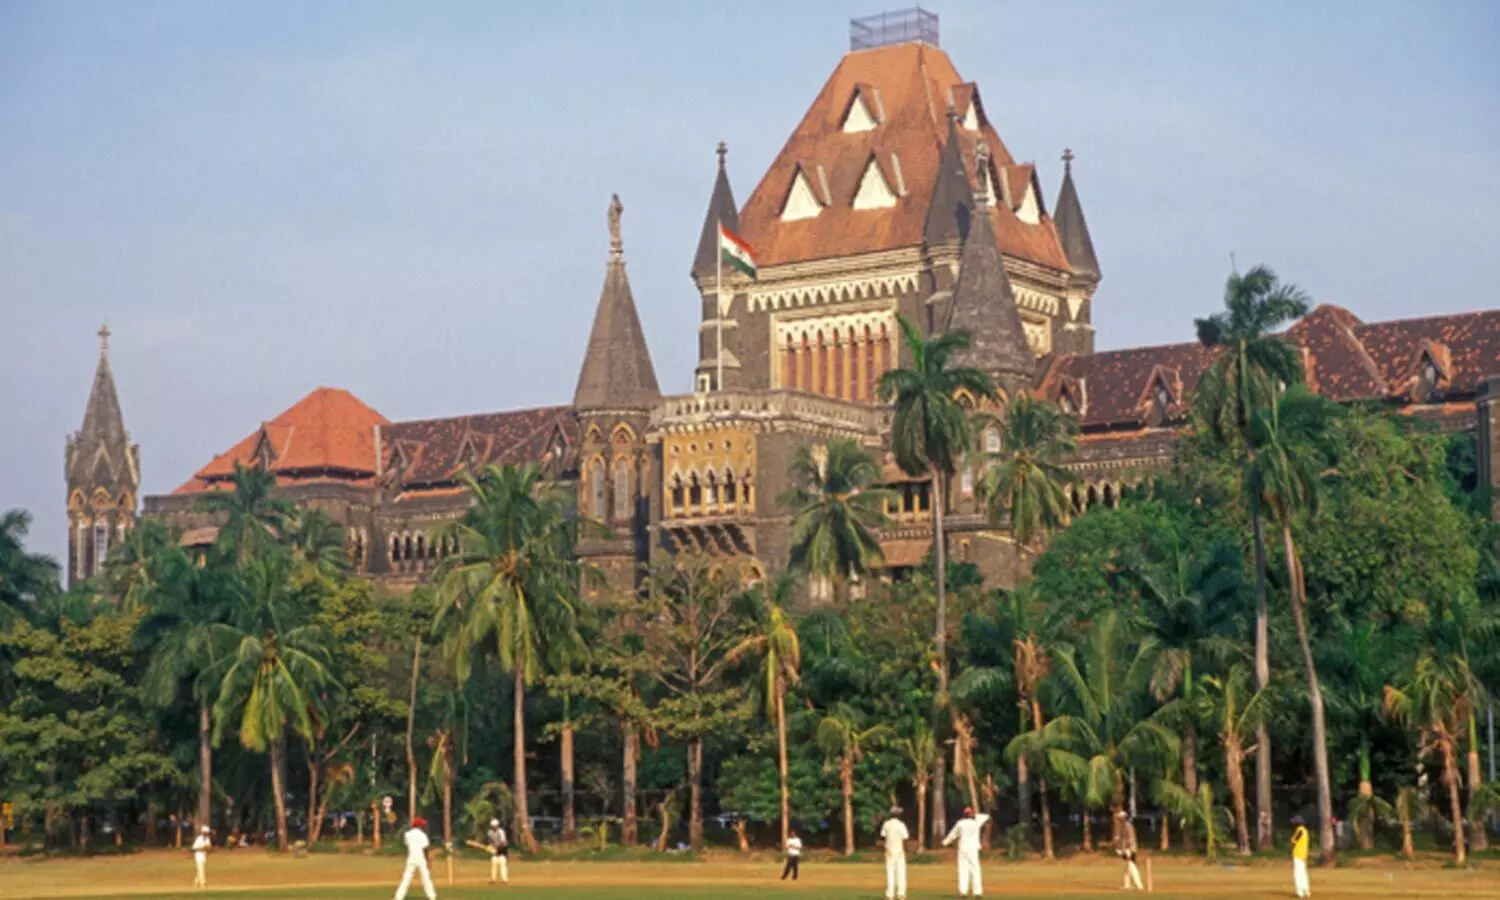 Bombay HC dismisses plea by PwD candidate, denies interfering in Physical eligibility Criteria for MBBS admissions